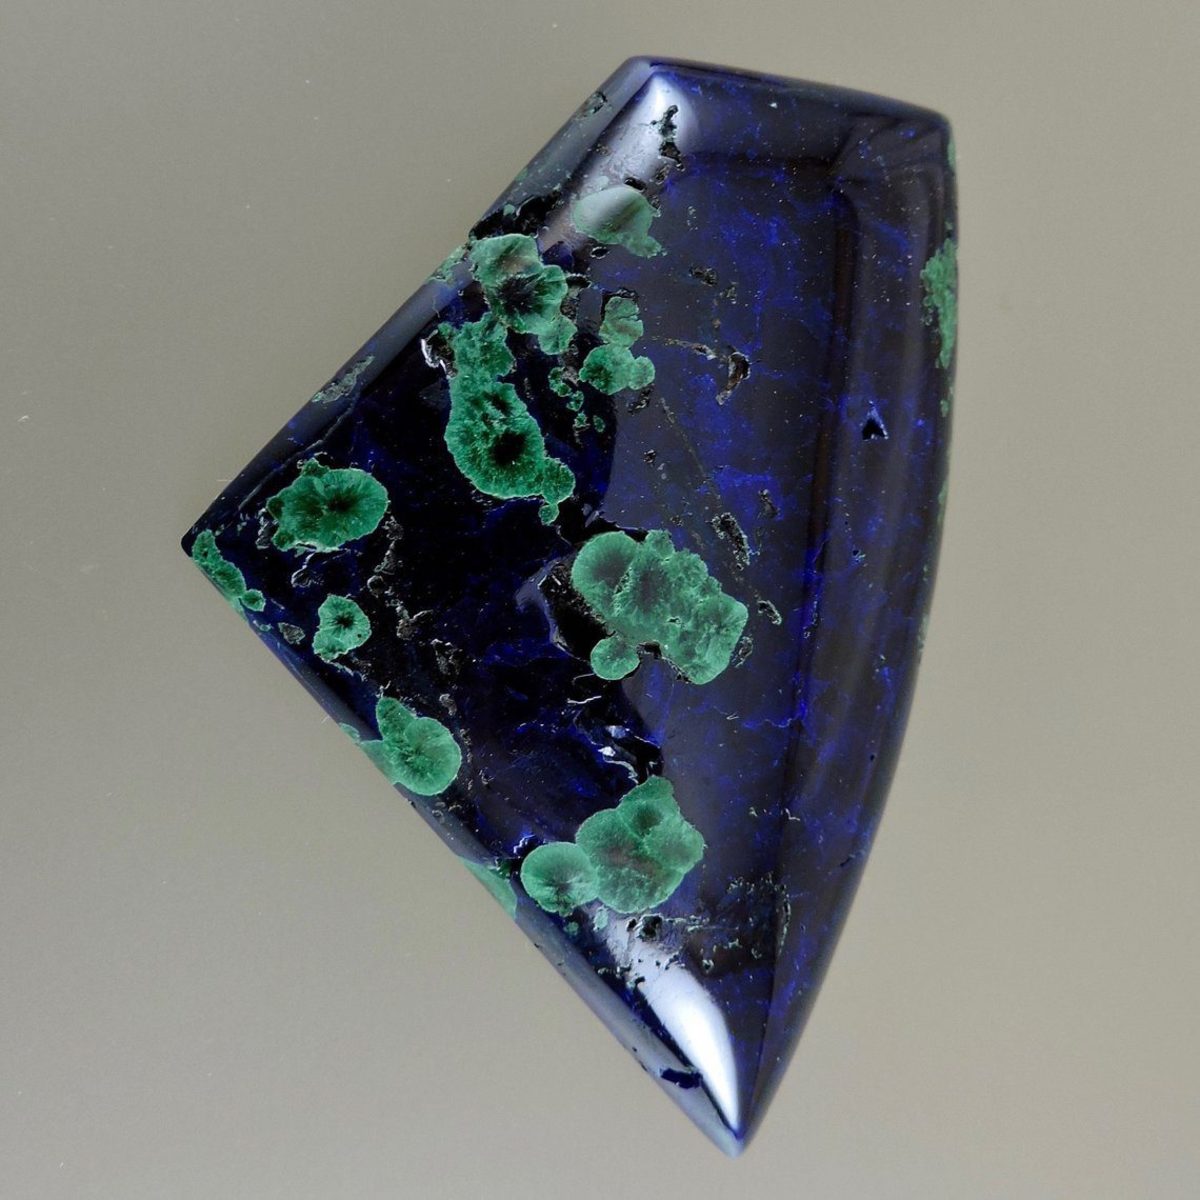 Facts About Azurite: Description, Properties, and Uses